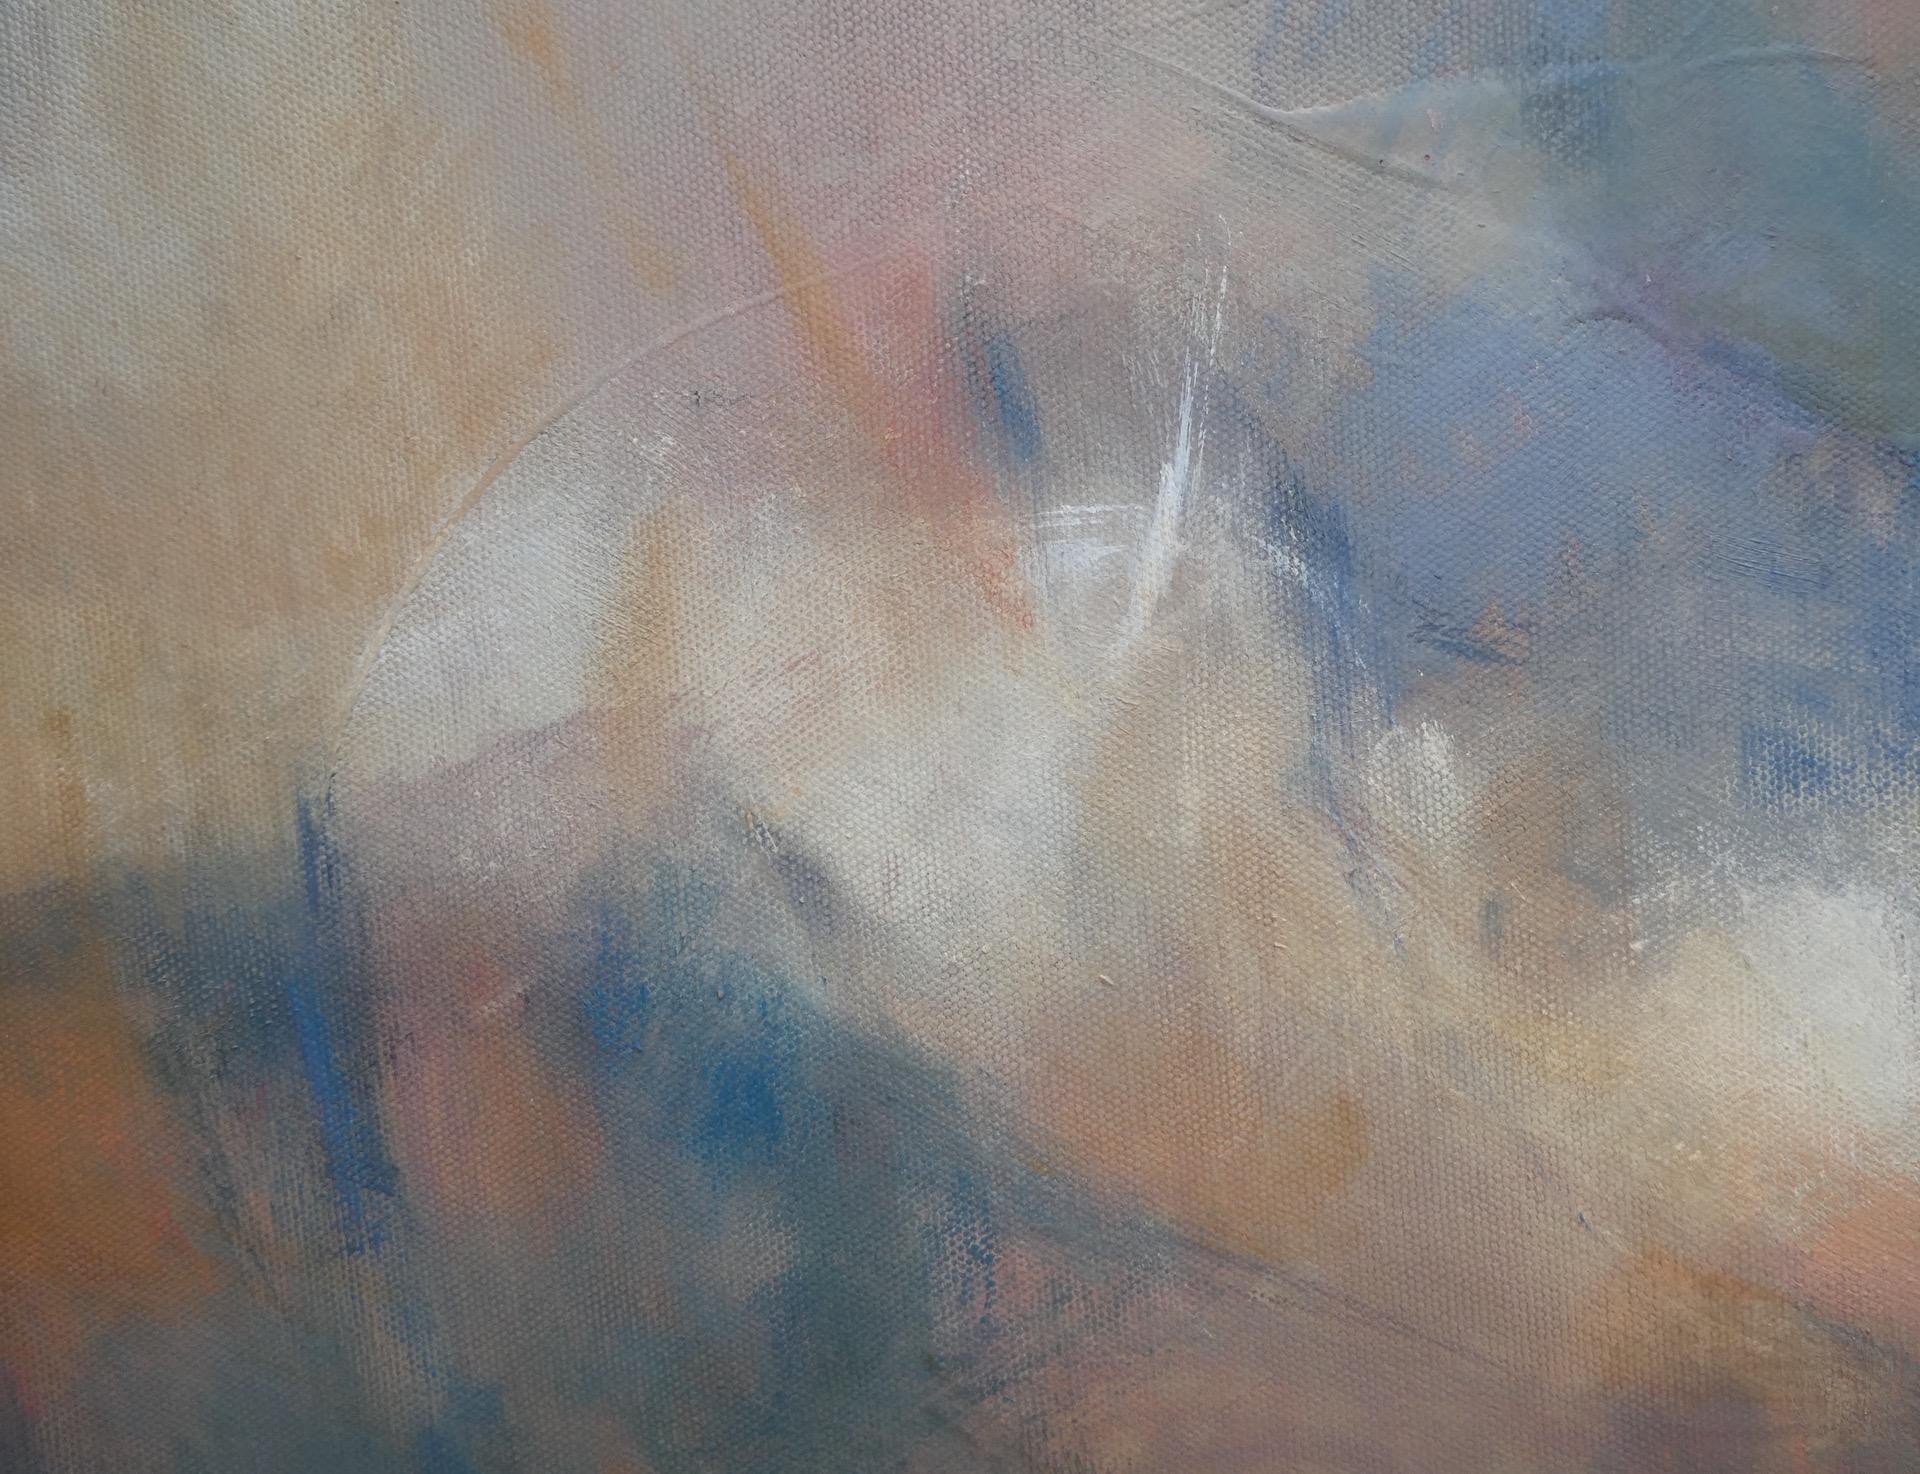 Jo Jenkins
Breaking Through 1, 2, 3
Original Abstract Landscape Painting
Oil and Gesso on Canvas
Individual Canvas Size: H 92cm x W 31cm
Minimum Hanging Space: H 92cm x W 92cm 
Sold Unframed
Please note that insitu images are purely an indication of